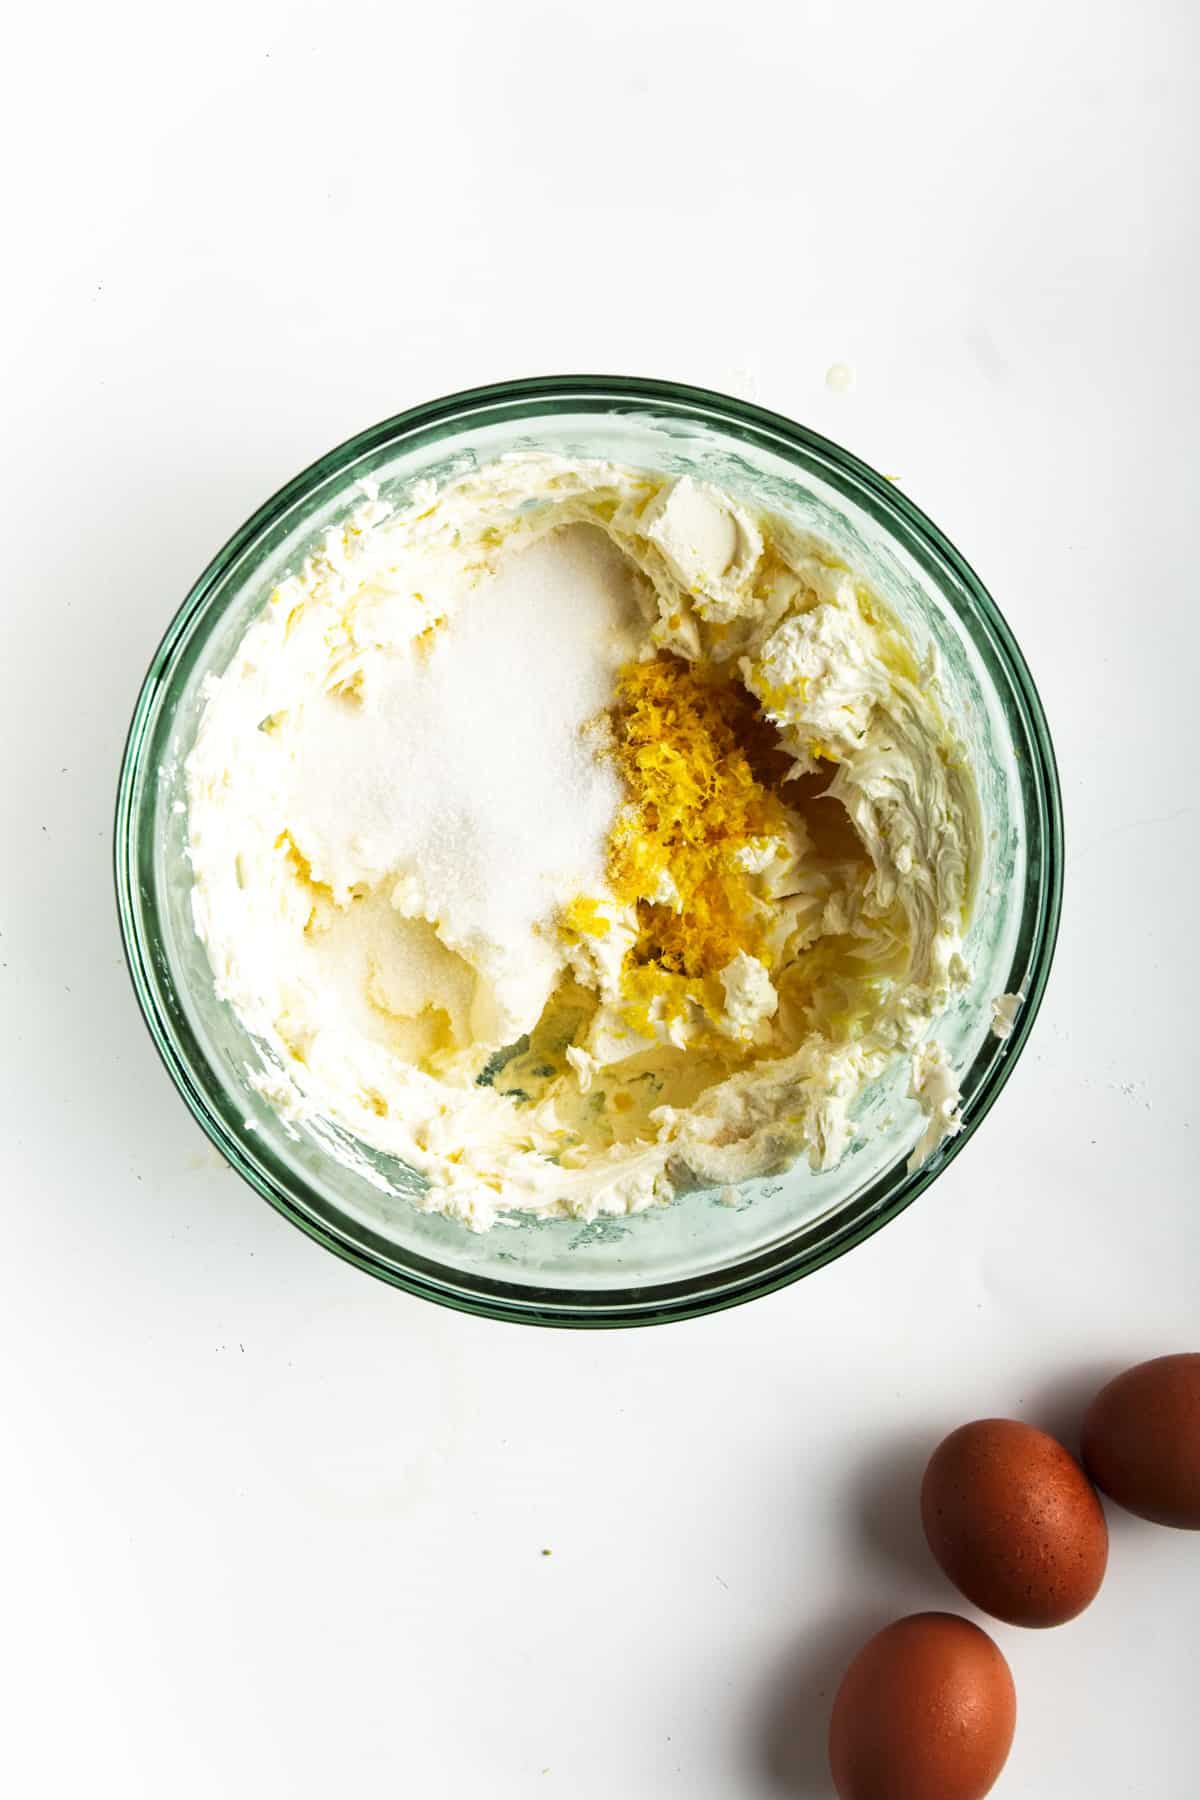 Cream cheese mixture with sugar, lemon zest, and ginger in glass bowl.